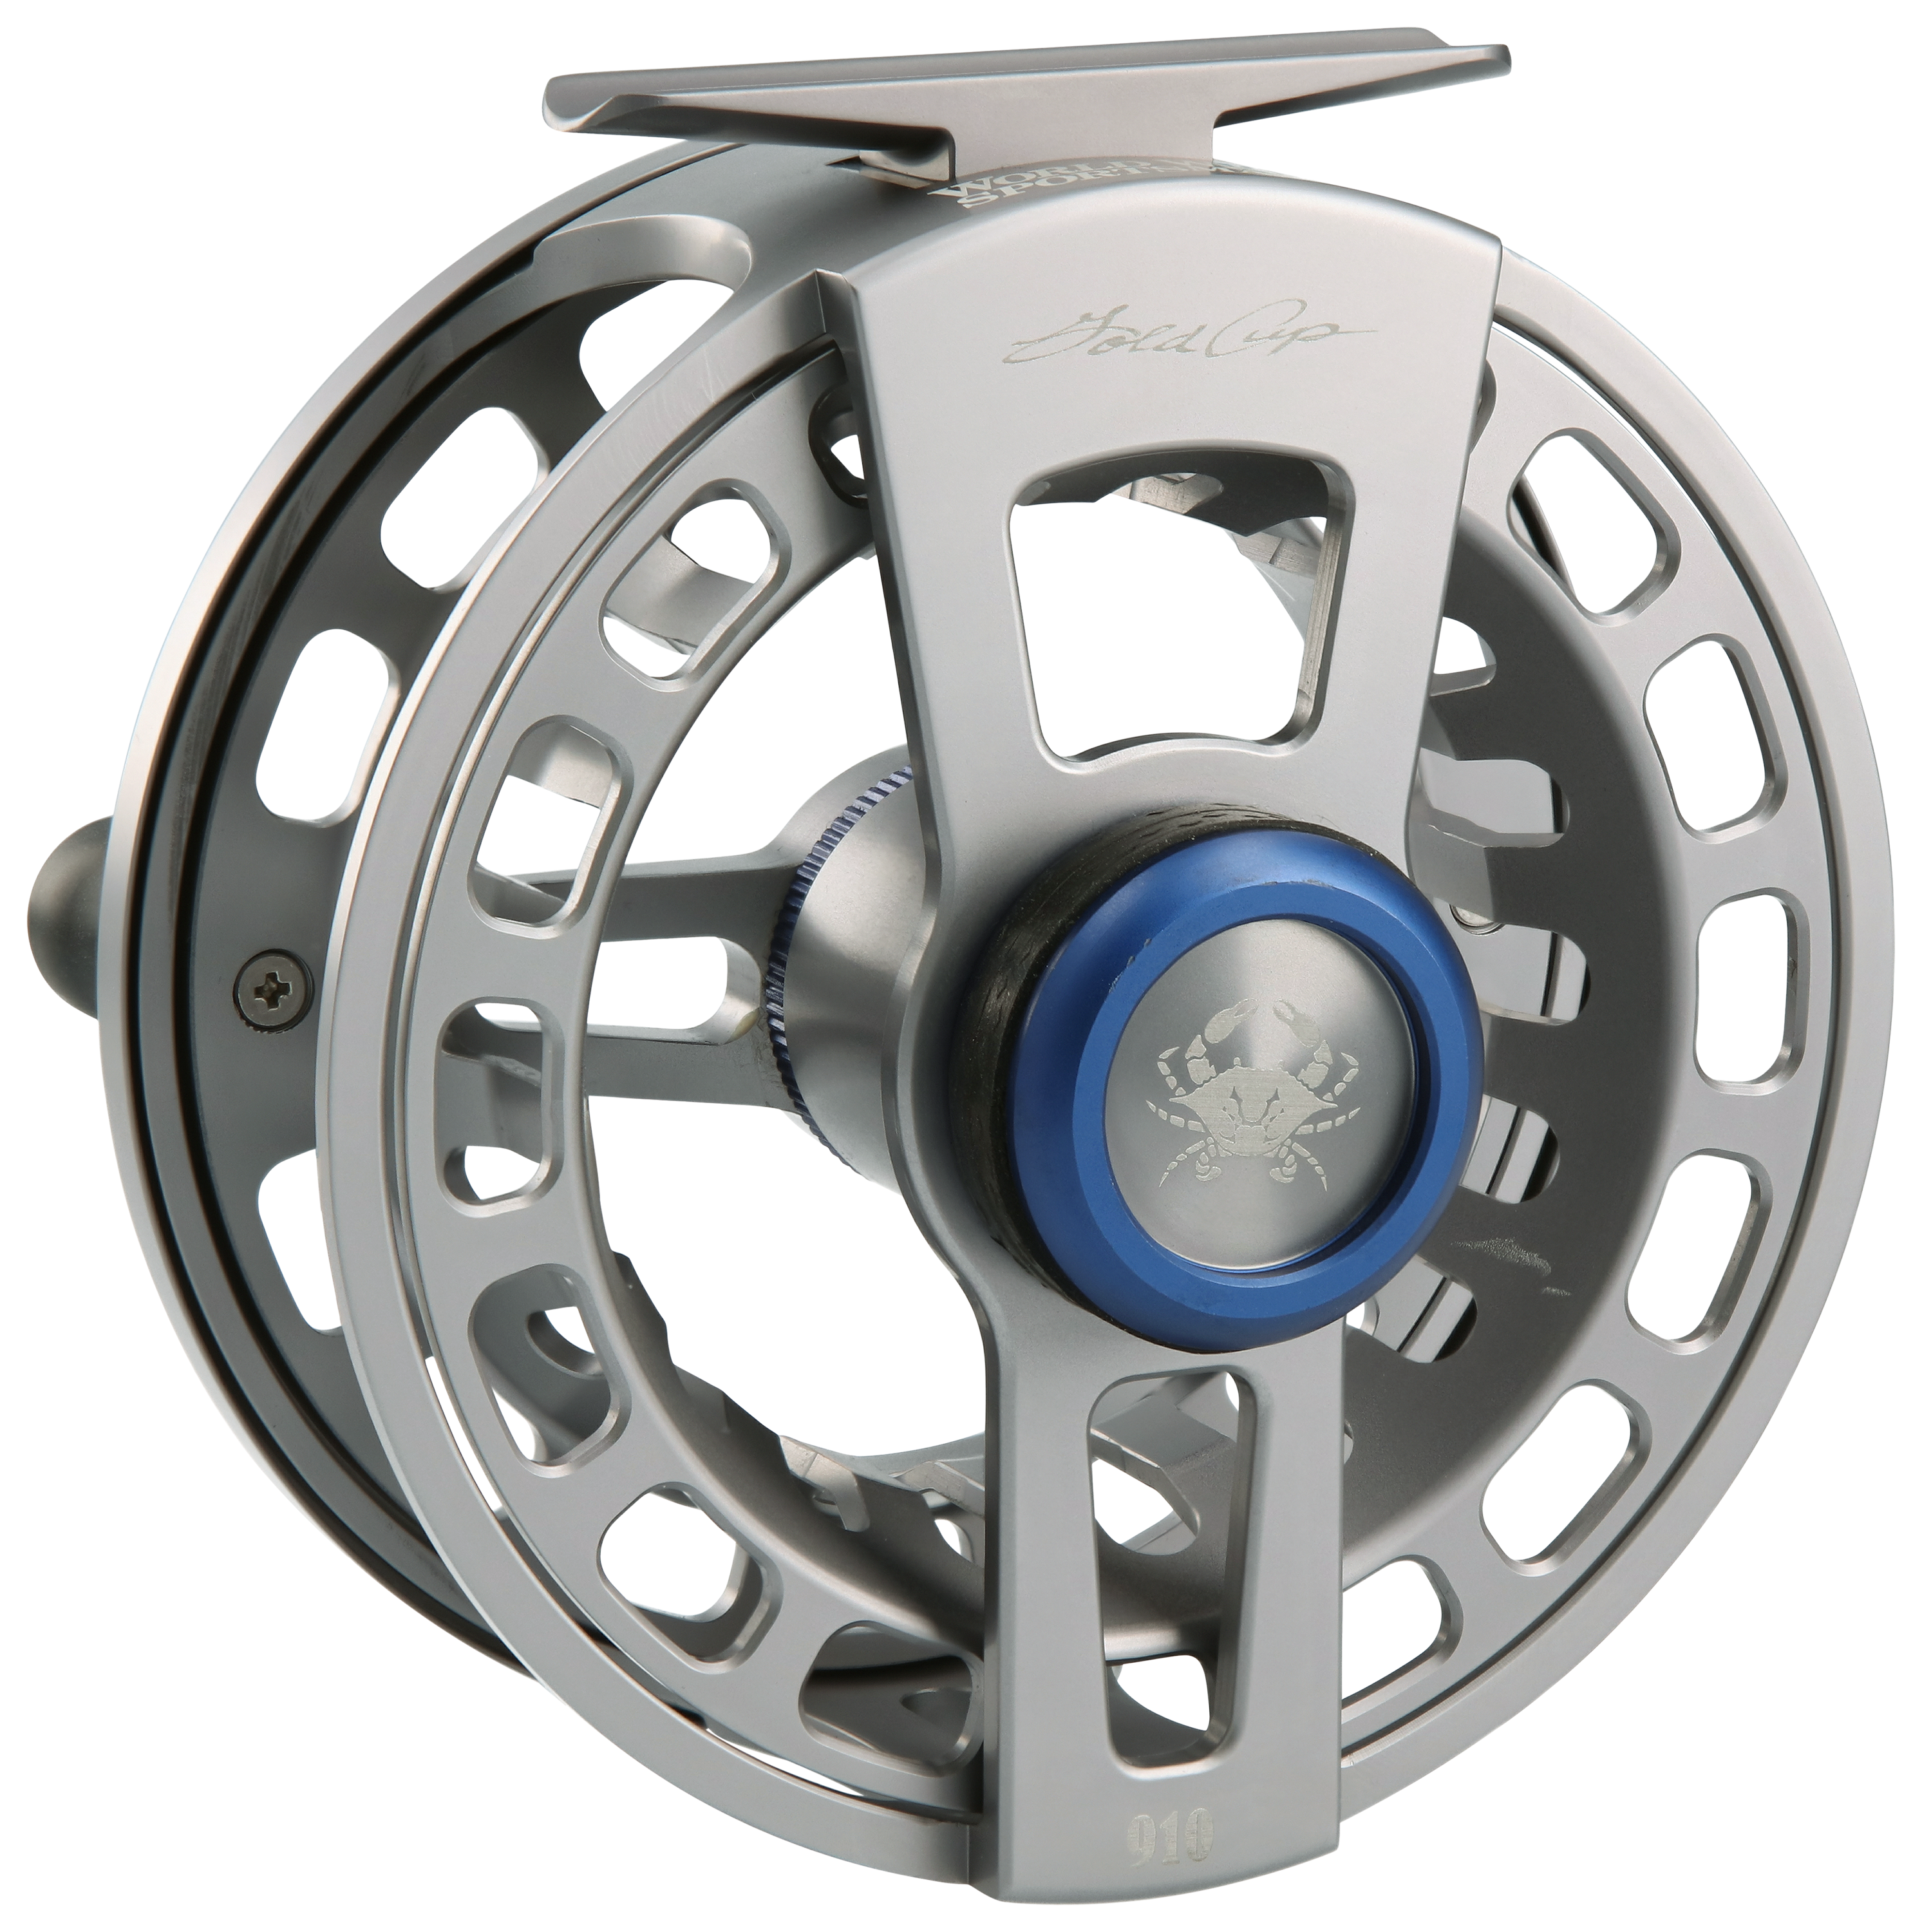 gold fly fishing reel, gold fly fishing reel Suppliers and Manufacturers at